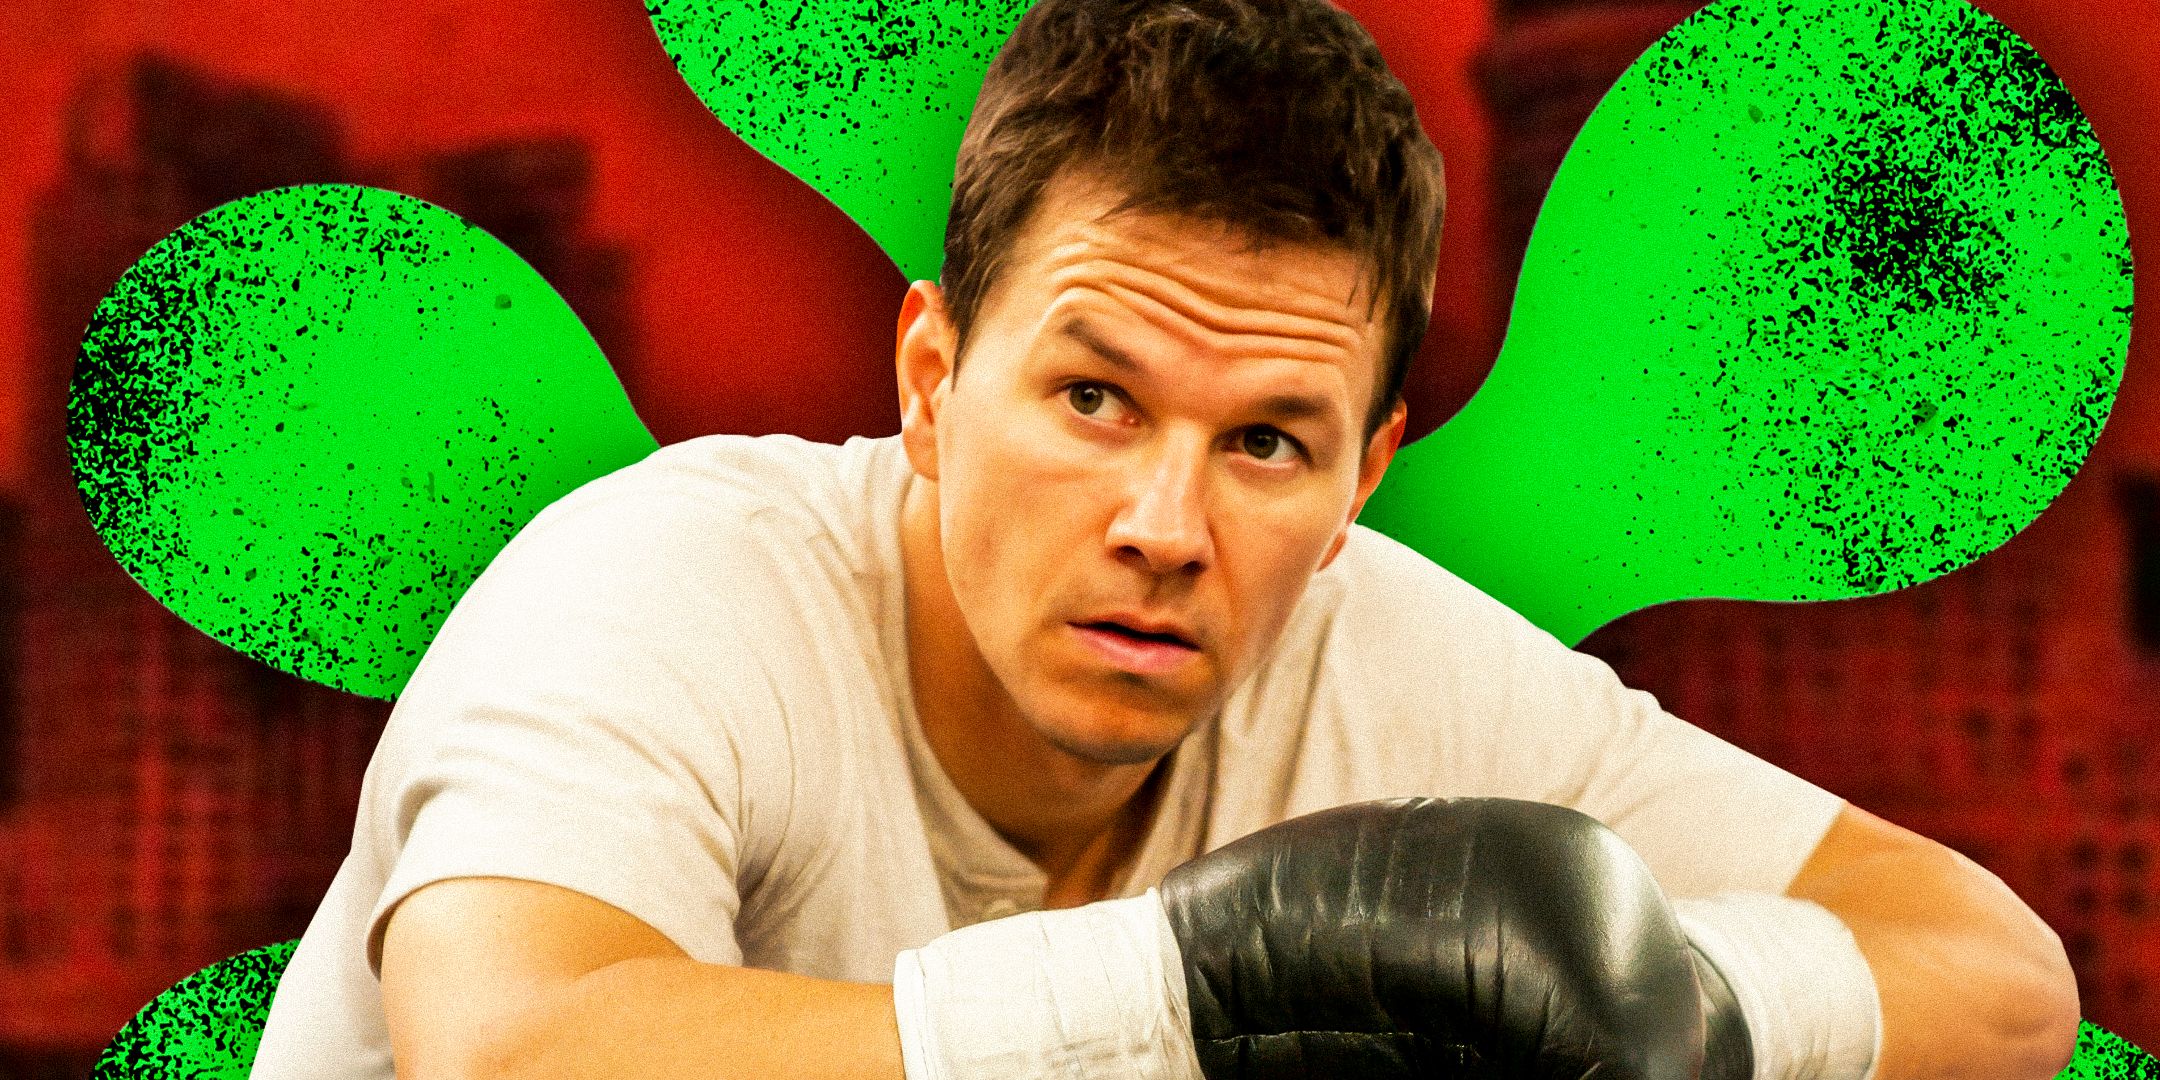 This Thriller With 80% On Rotten Tomatoes That Just Hit Netflix Is A Reminder Of How Good Mark Wahlberg Can Be